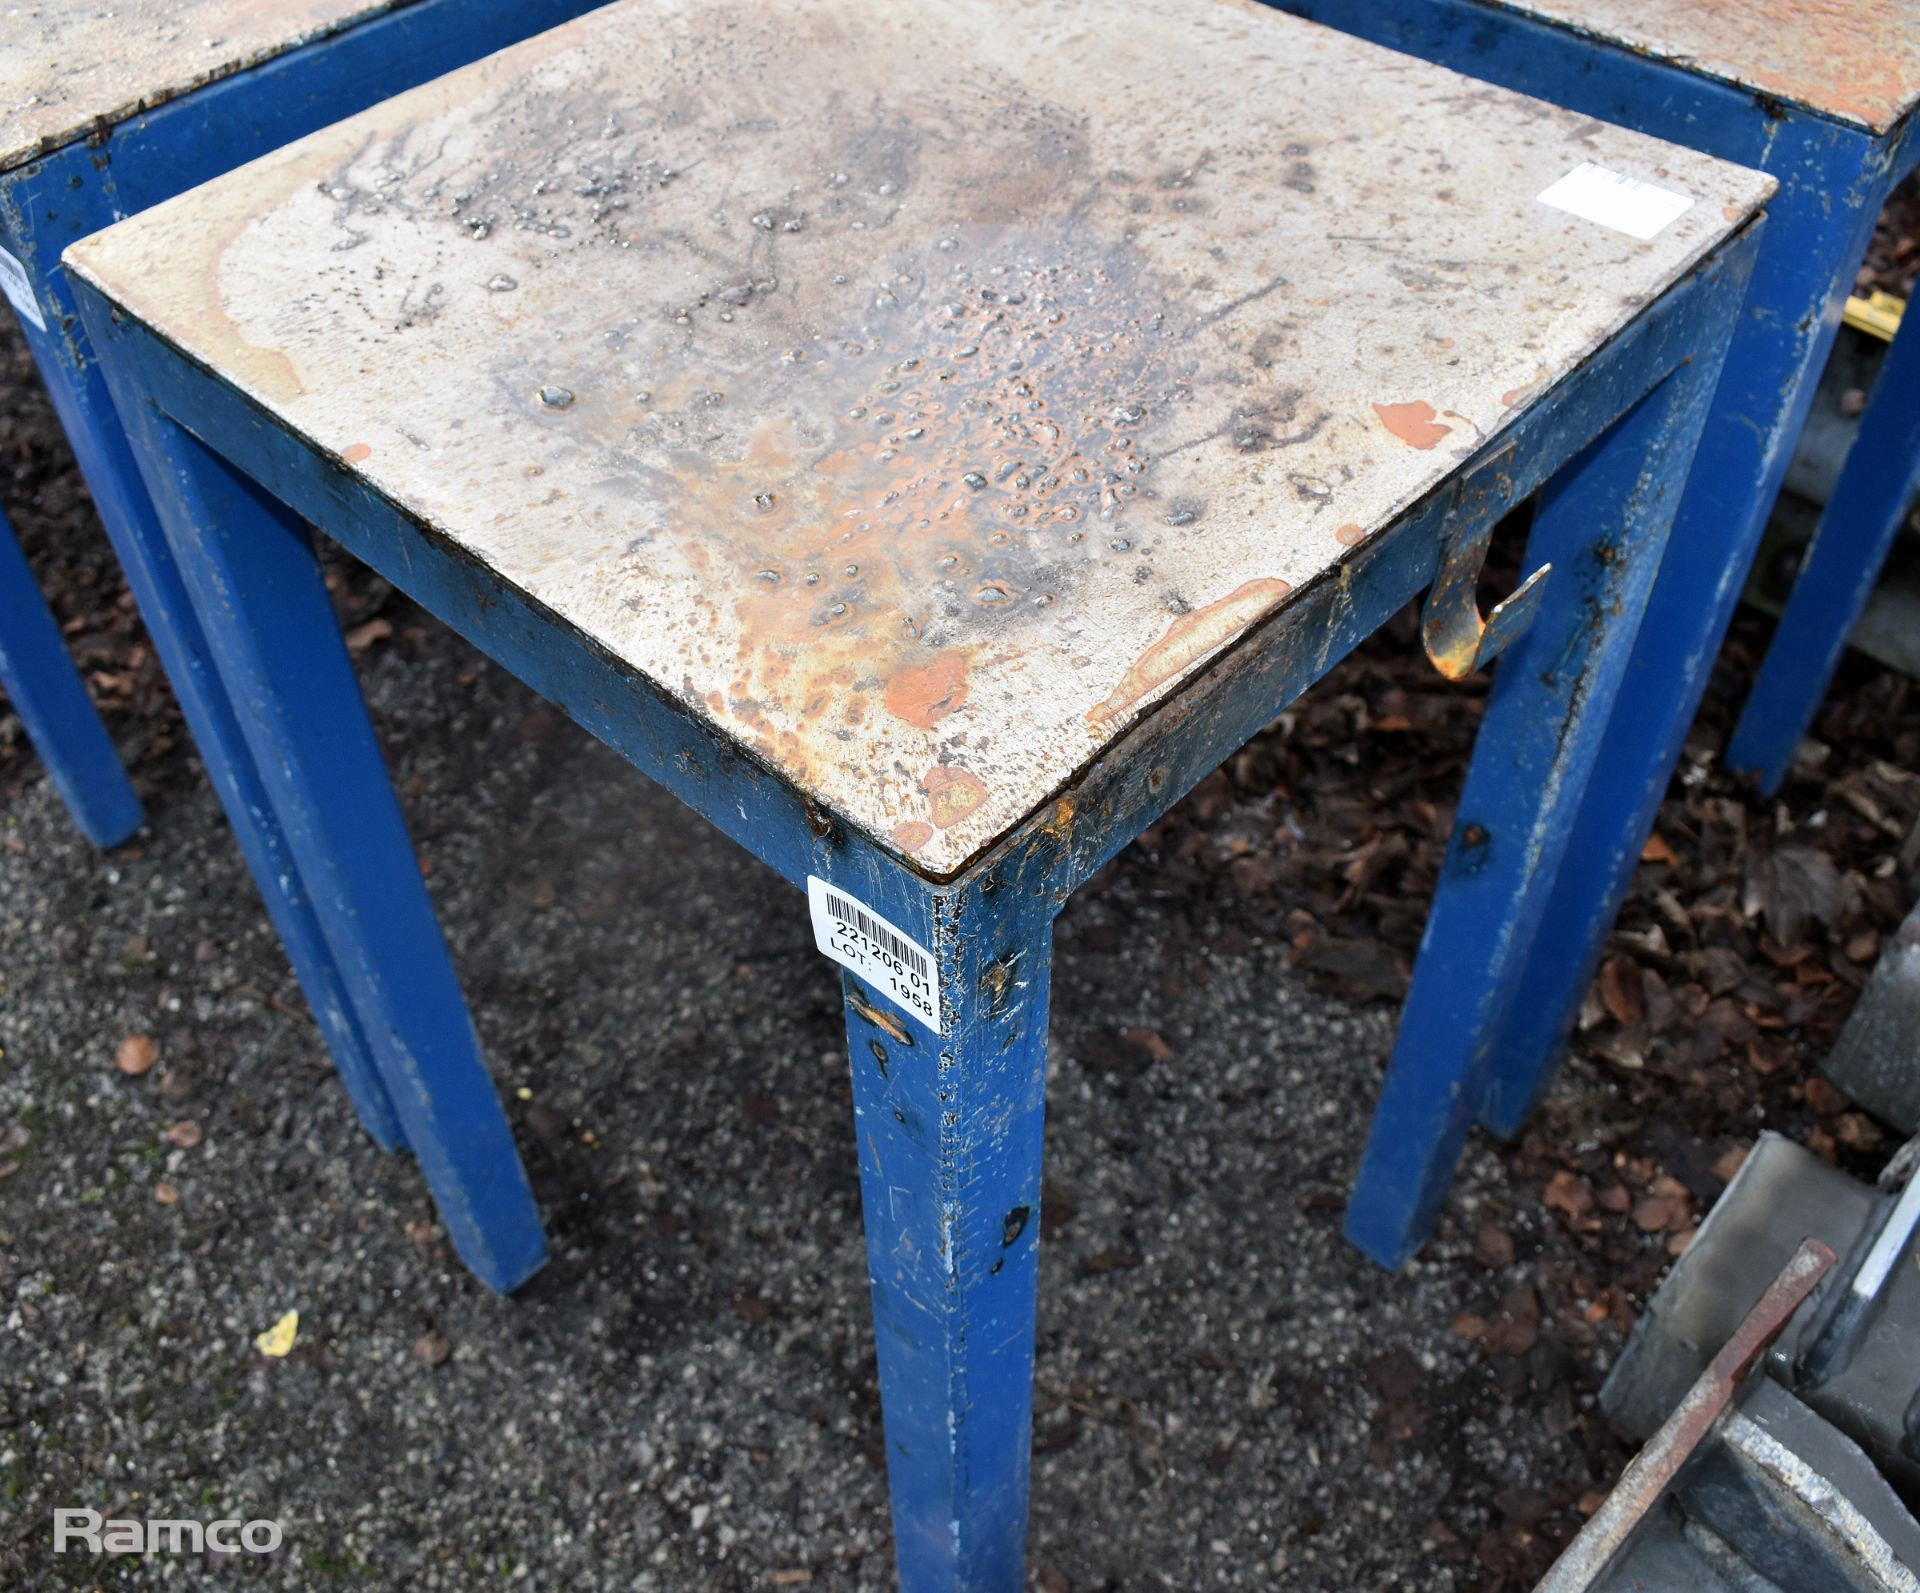 2x Small metal workshop/welding tables - dimensions: 50 x 50 x 80cm - Image 2 of 3